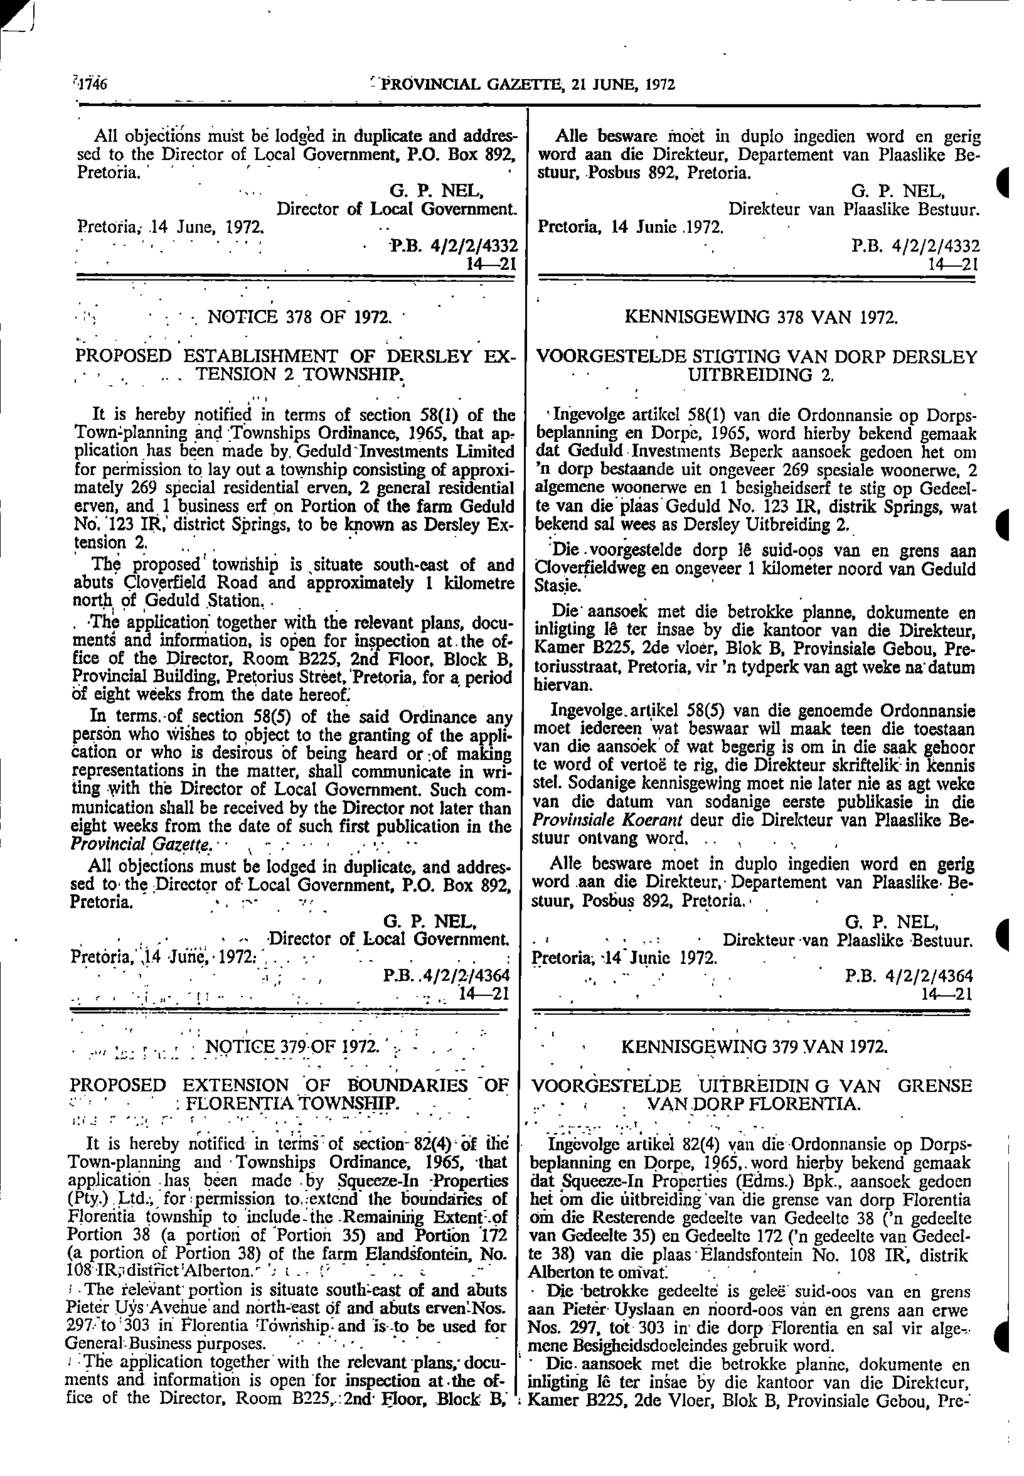 1 1 Die _r_ri,746 irovncal GAZETTE, 21 JUNE, 1972, All objeetions mist be lodged in duplicate and addres Alle besware fleet in duplo ingedien word en gerig sed to the Director of Local Government, PO